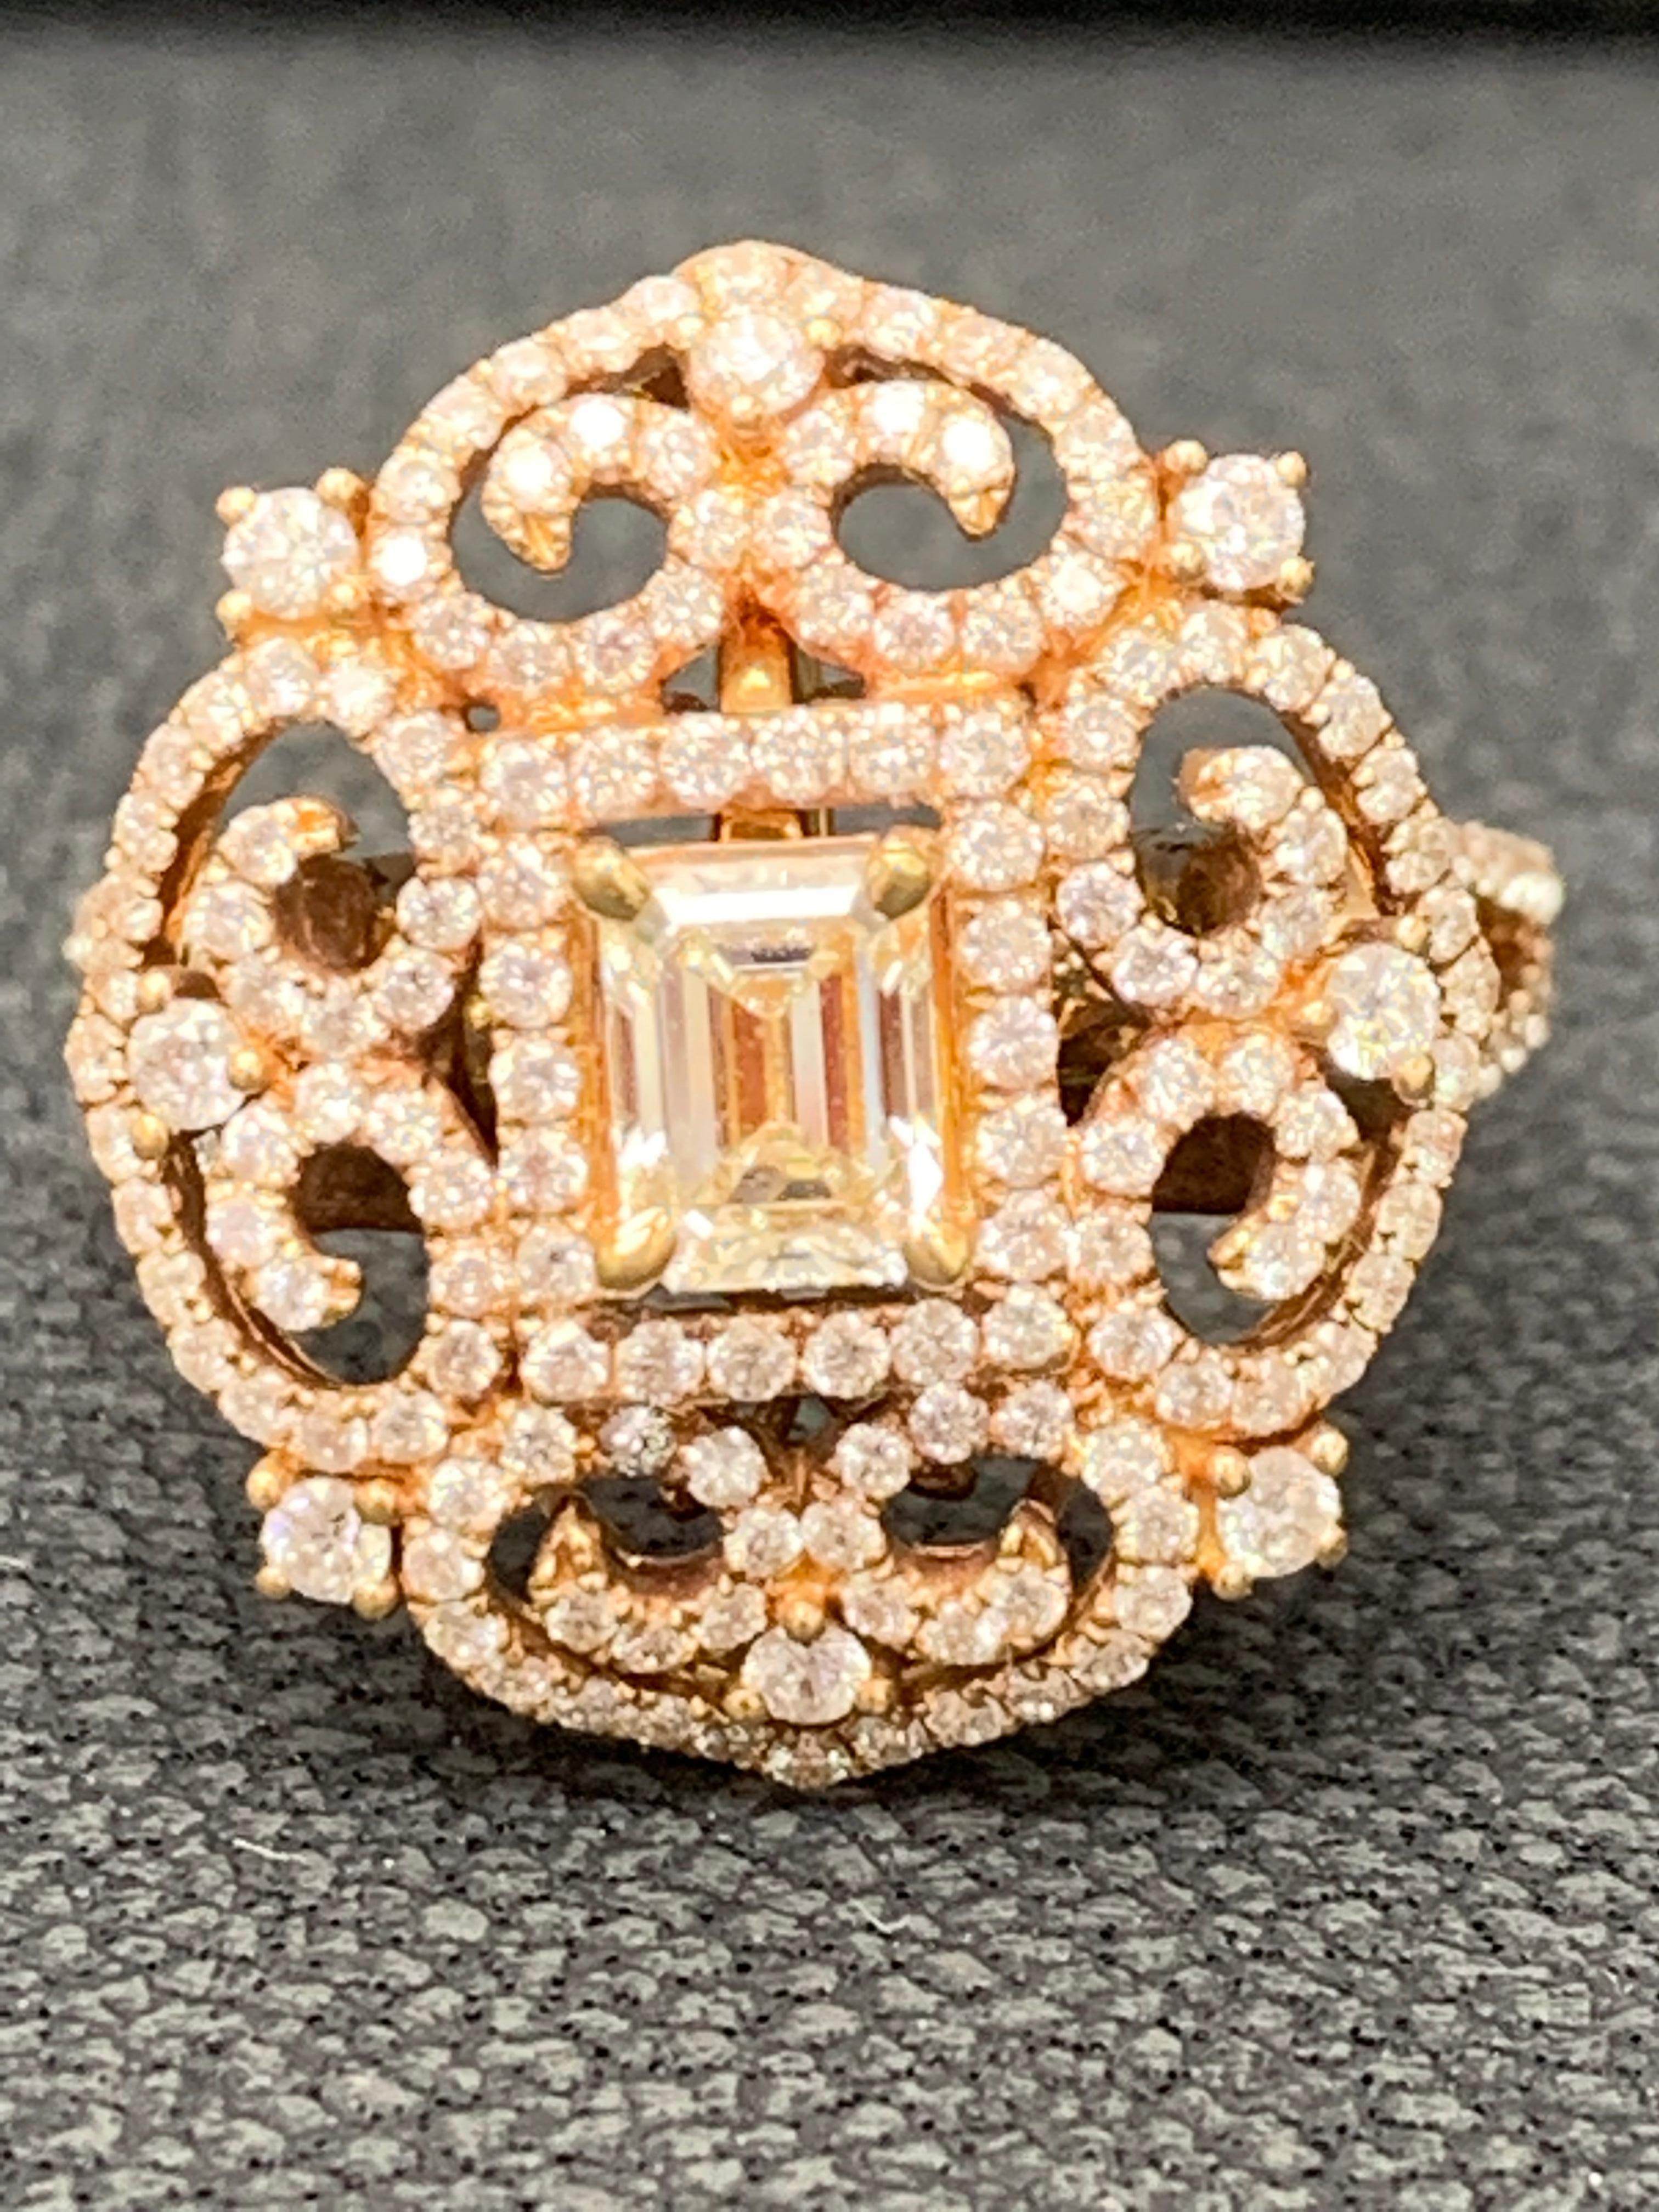 This ring showcases 0.50 carats of emerald cut diamond in the center and 0.94 carats of brilliant-cut round diamonds, set in a fashionable open-work design. Its a 2 in 1 design. can be worn as a ring and pendant both. Made in 18 karats rose gold.